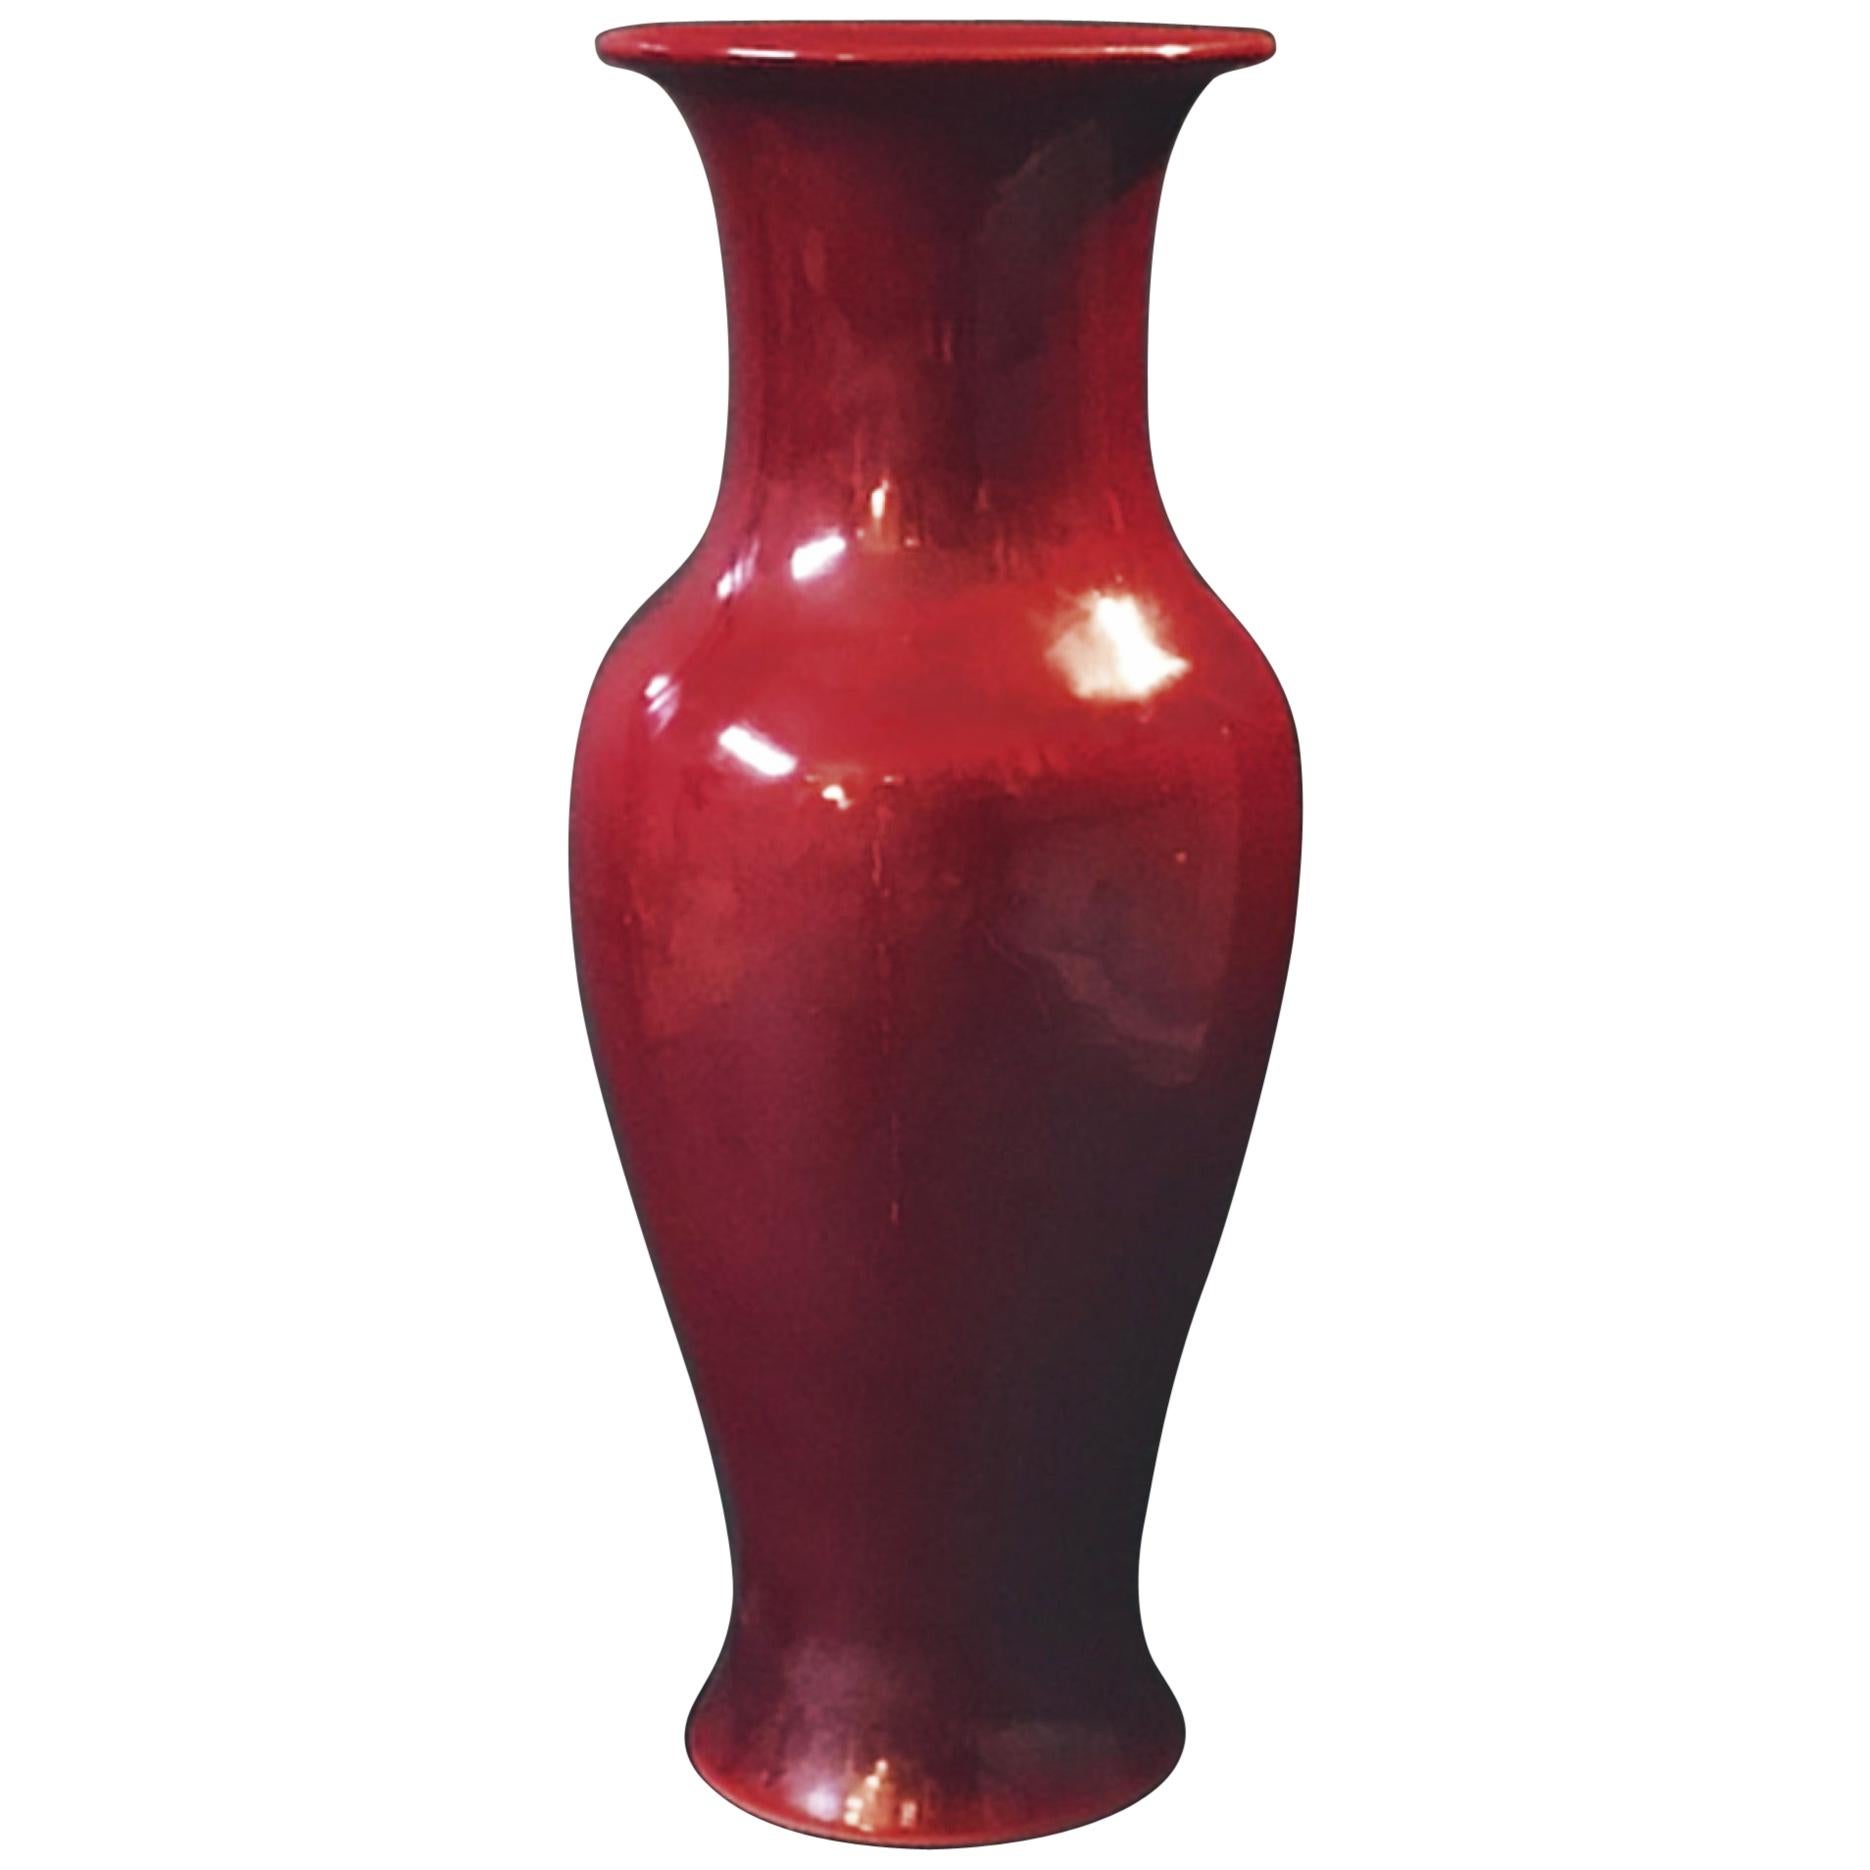 Early 20th Century Chinese Red Porcelain Sang de Boeuf Oxblood Vase